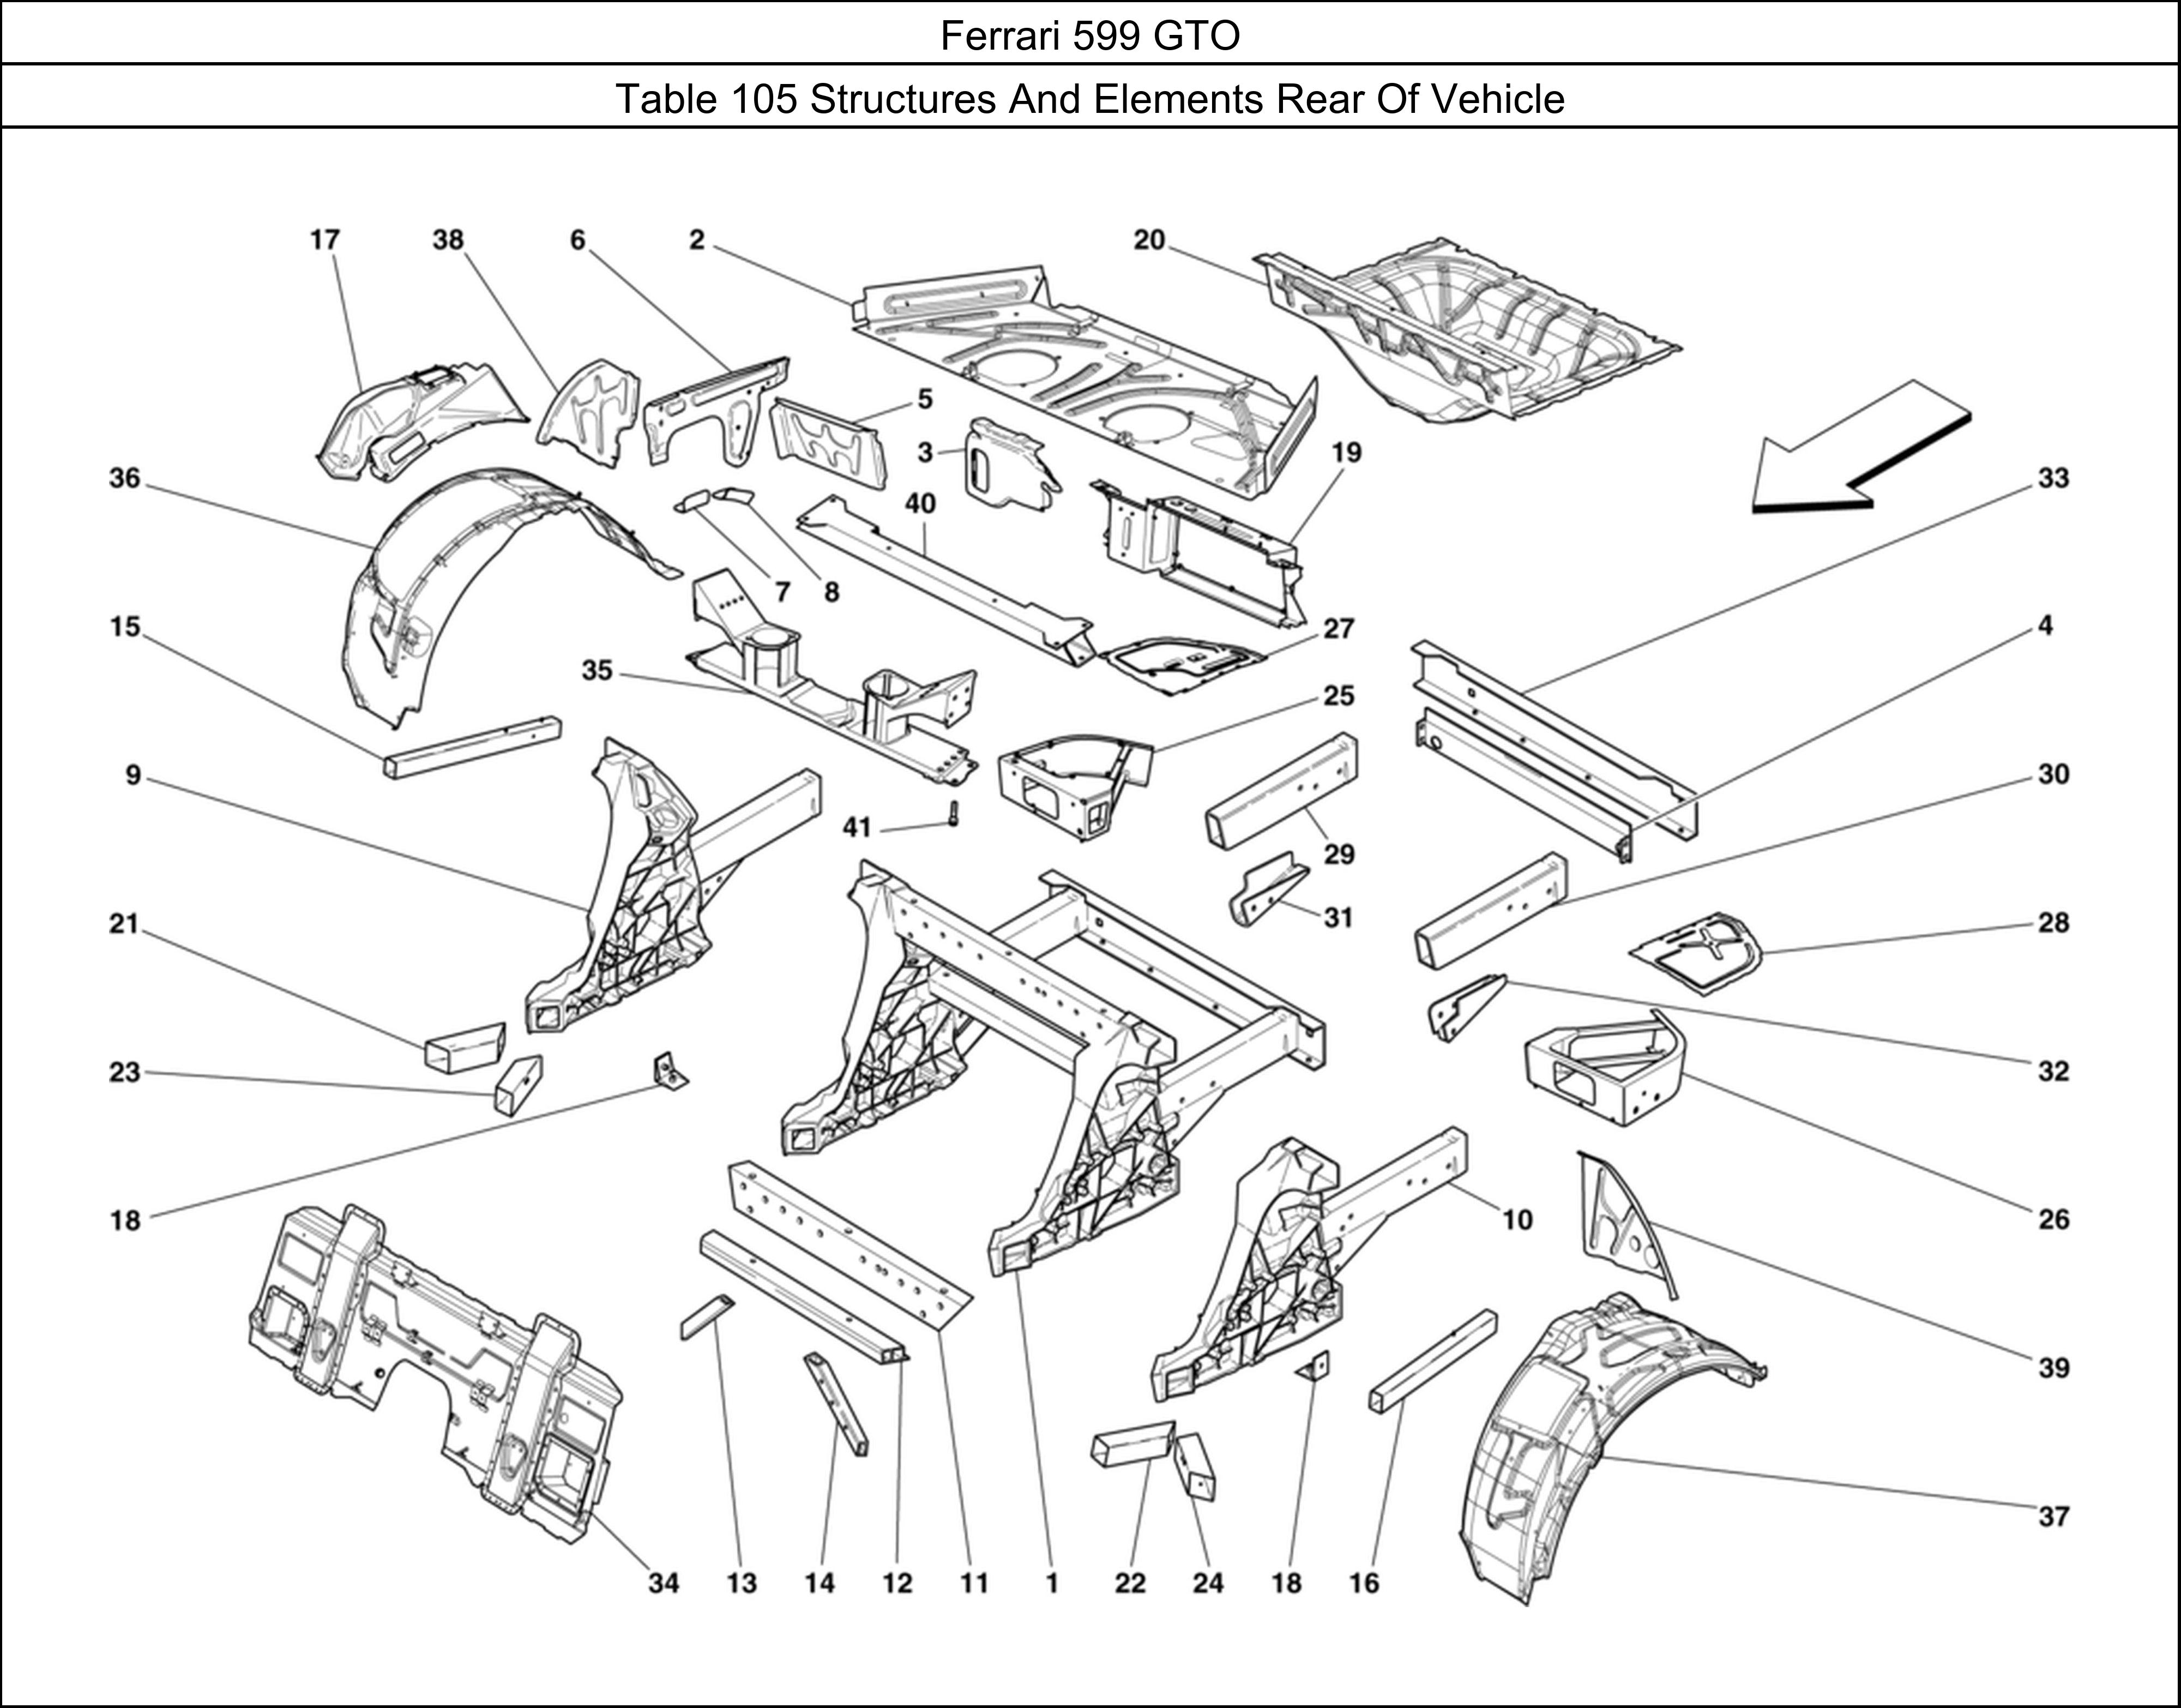 Ferrari Parts Ferrari 599 GTO Table 105 Structures And Elements Rear Of Vehicle